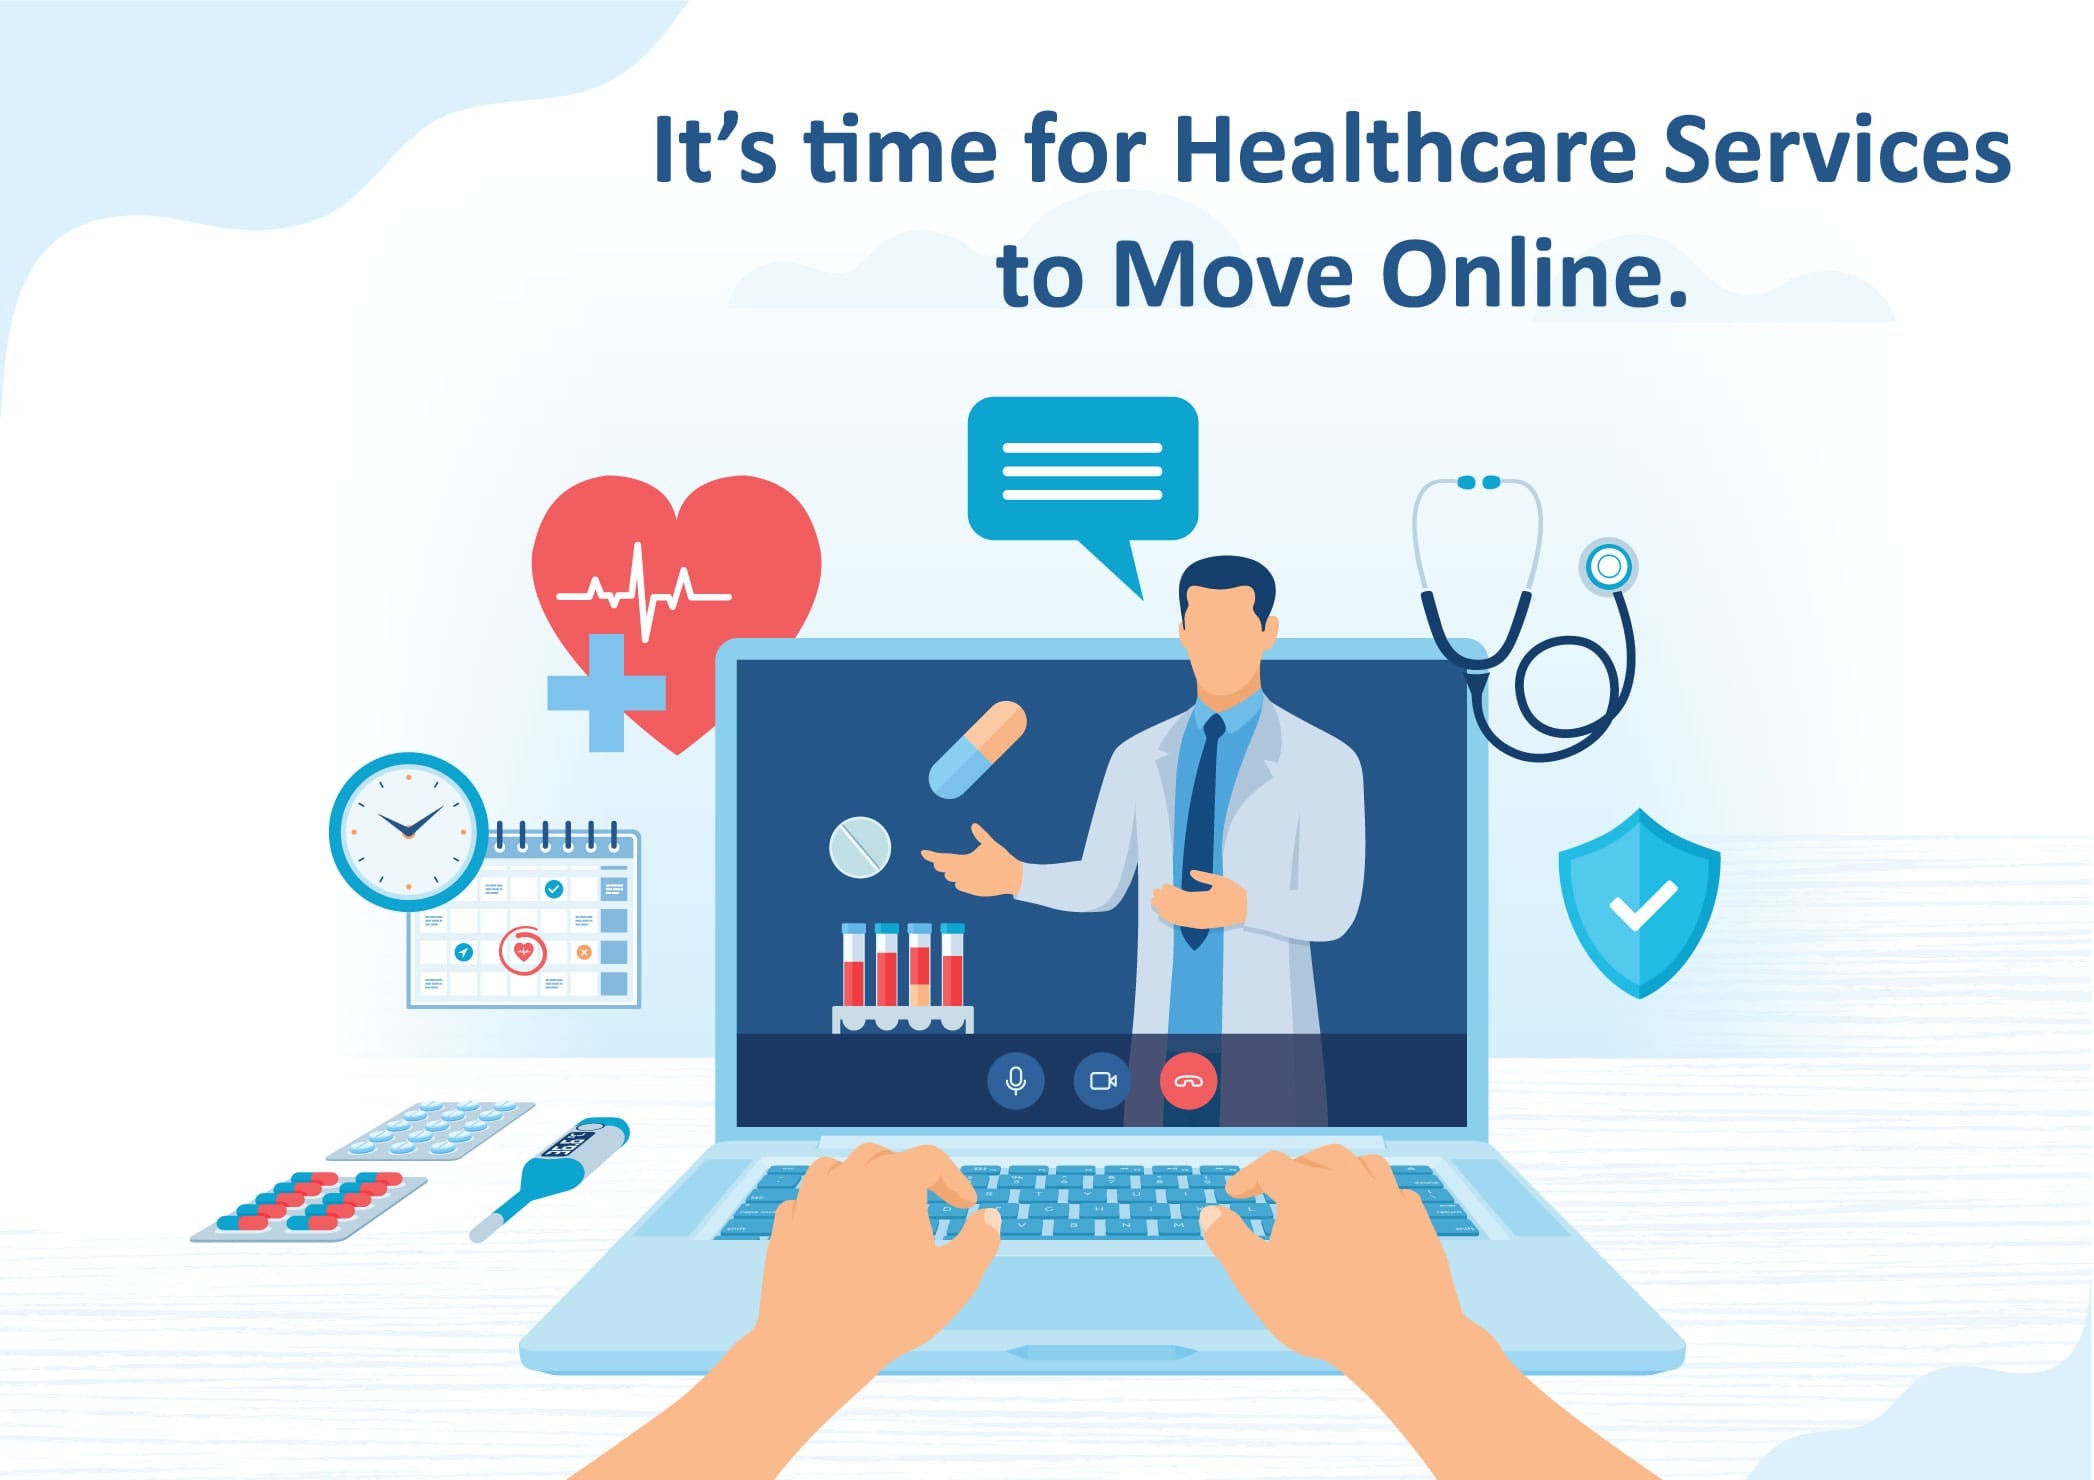 It’s time for Healthcare Services to Move Online